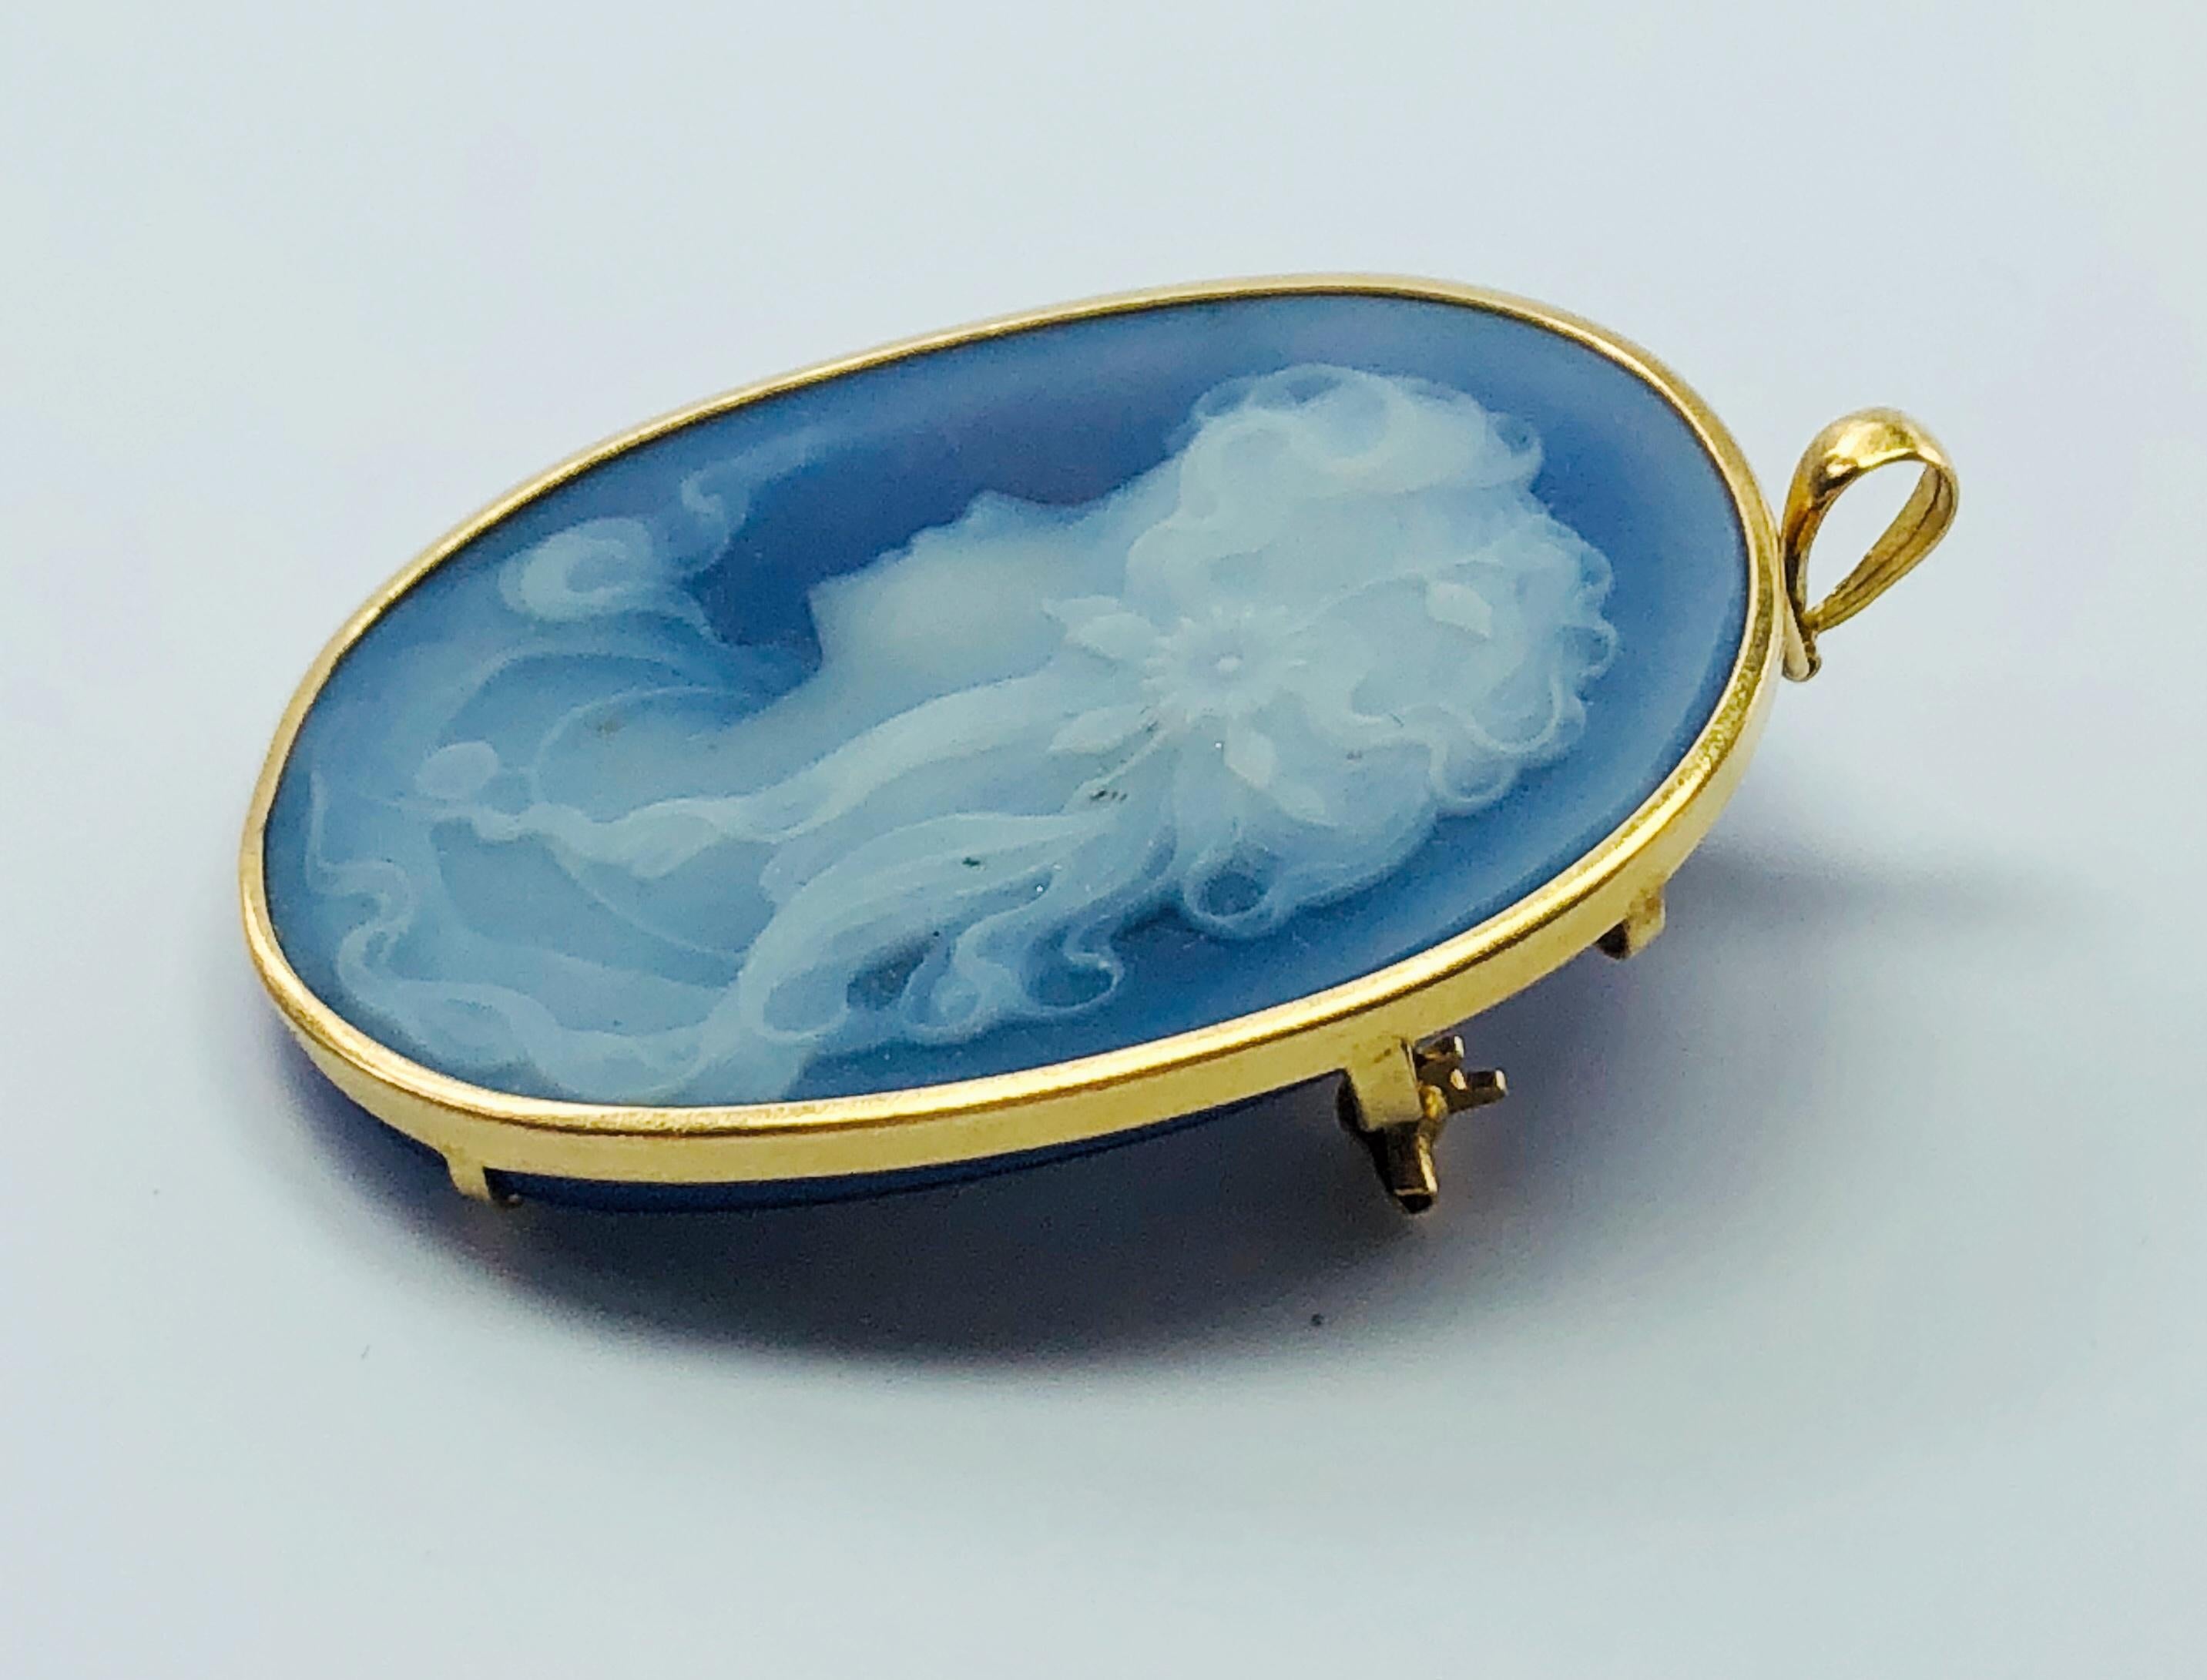 This absolutely gorgeous cameo is in the Wedgewood Style! Profile of a young woman with long curls down her neck and a beautiful flower in her hair. It is hand carved porcelain that is set in an 18K yellow Gold setting. This beautiful piece can be